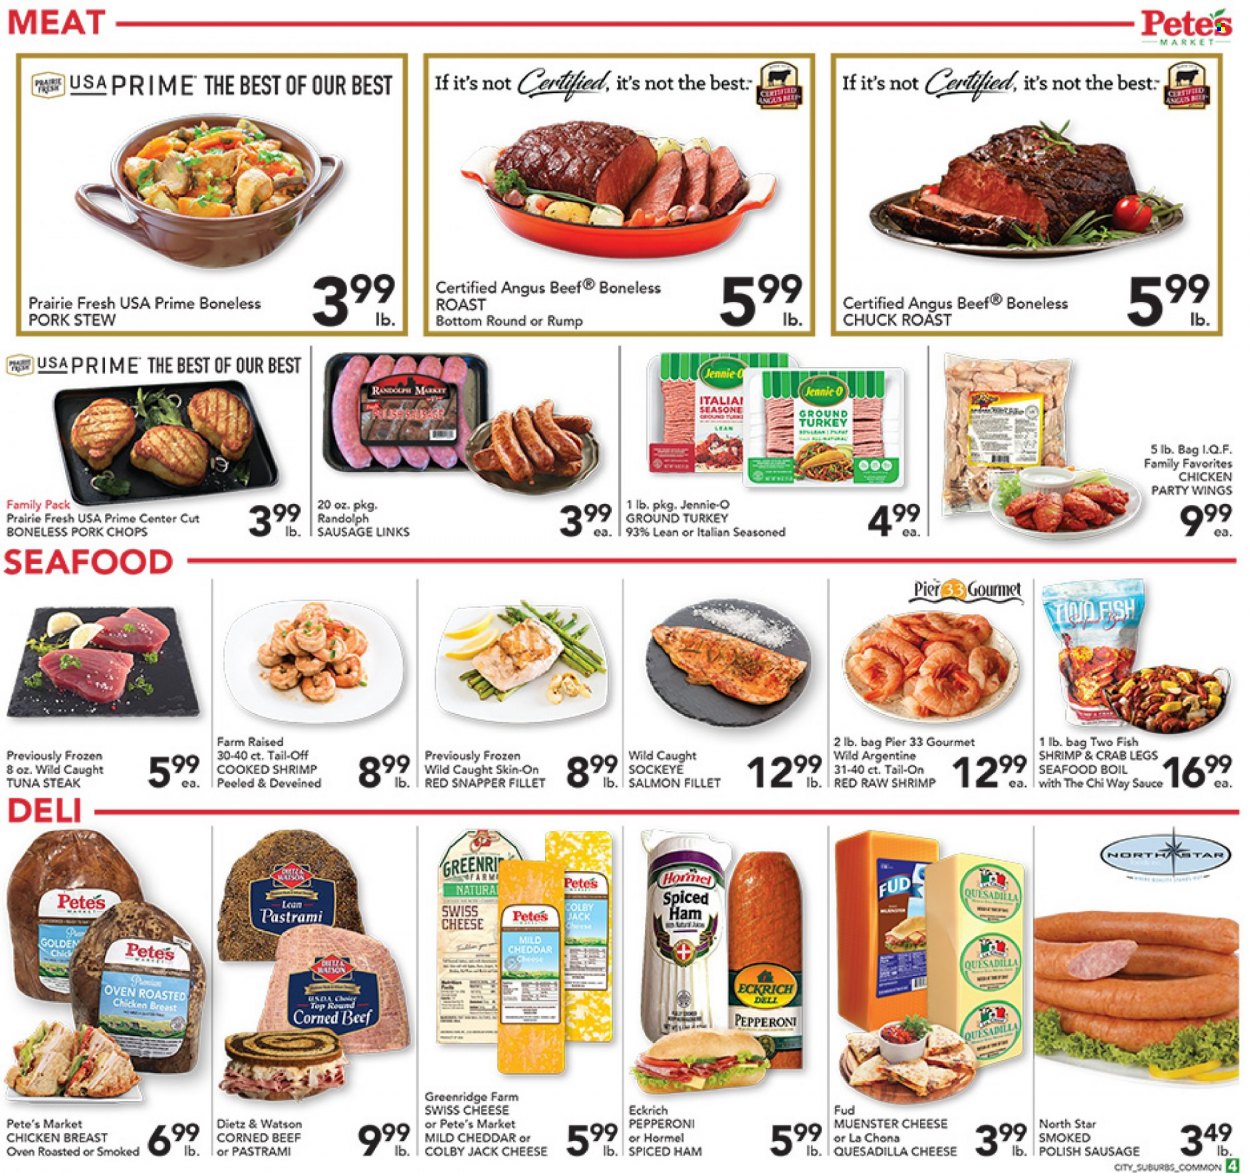 thumbnail - Pete's Fresh Market Flyer - 02/01/2023 - 02/07/2023 - Sales products - red snapper, salmon, salmon fillet, tuna, seafood, crab legs, crab, fish, shrimps, seafood boil, chicken roast, sauce, Hormel, ham, pastrami, Dietz & Watson, sausage, polish sausage, pepperoni, corned beef, Colby cheese, mild cheddar, swiss cheese, cheddar, Münster cheese, tuna steak, ground turkey, beef meat, steak, chuck roast, pork chops, pork meat. Page 5.